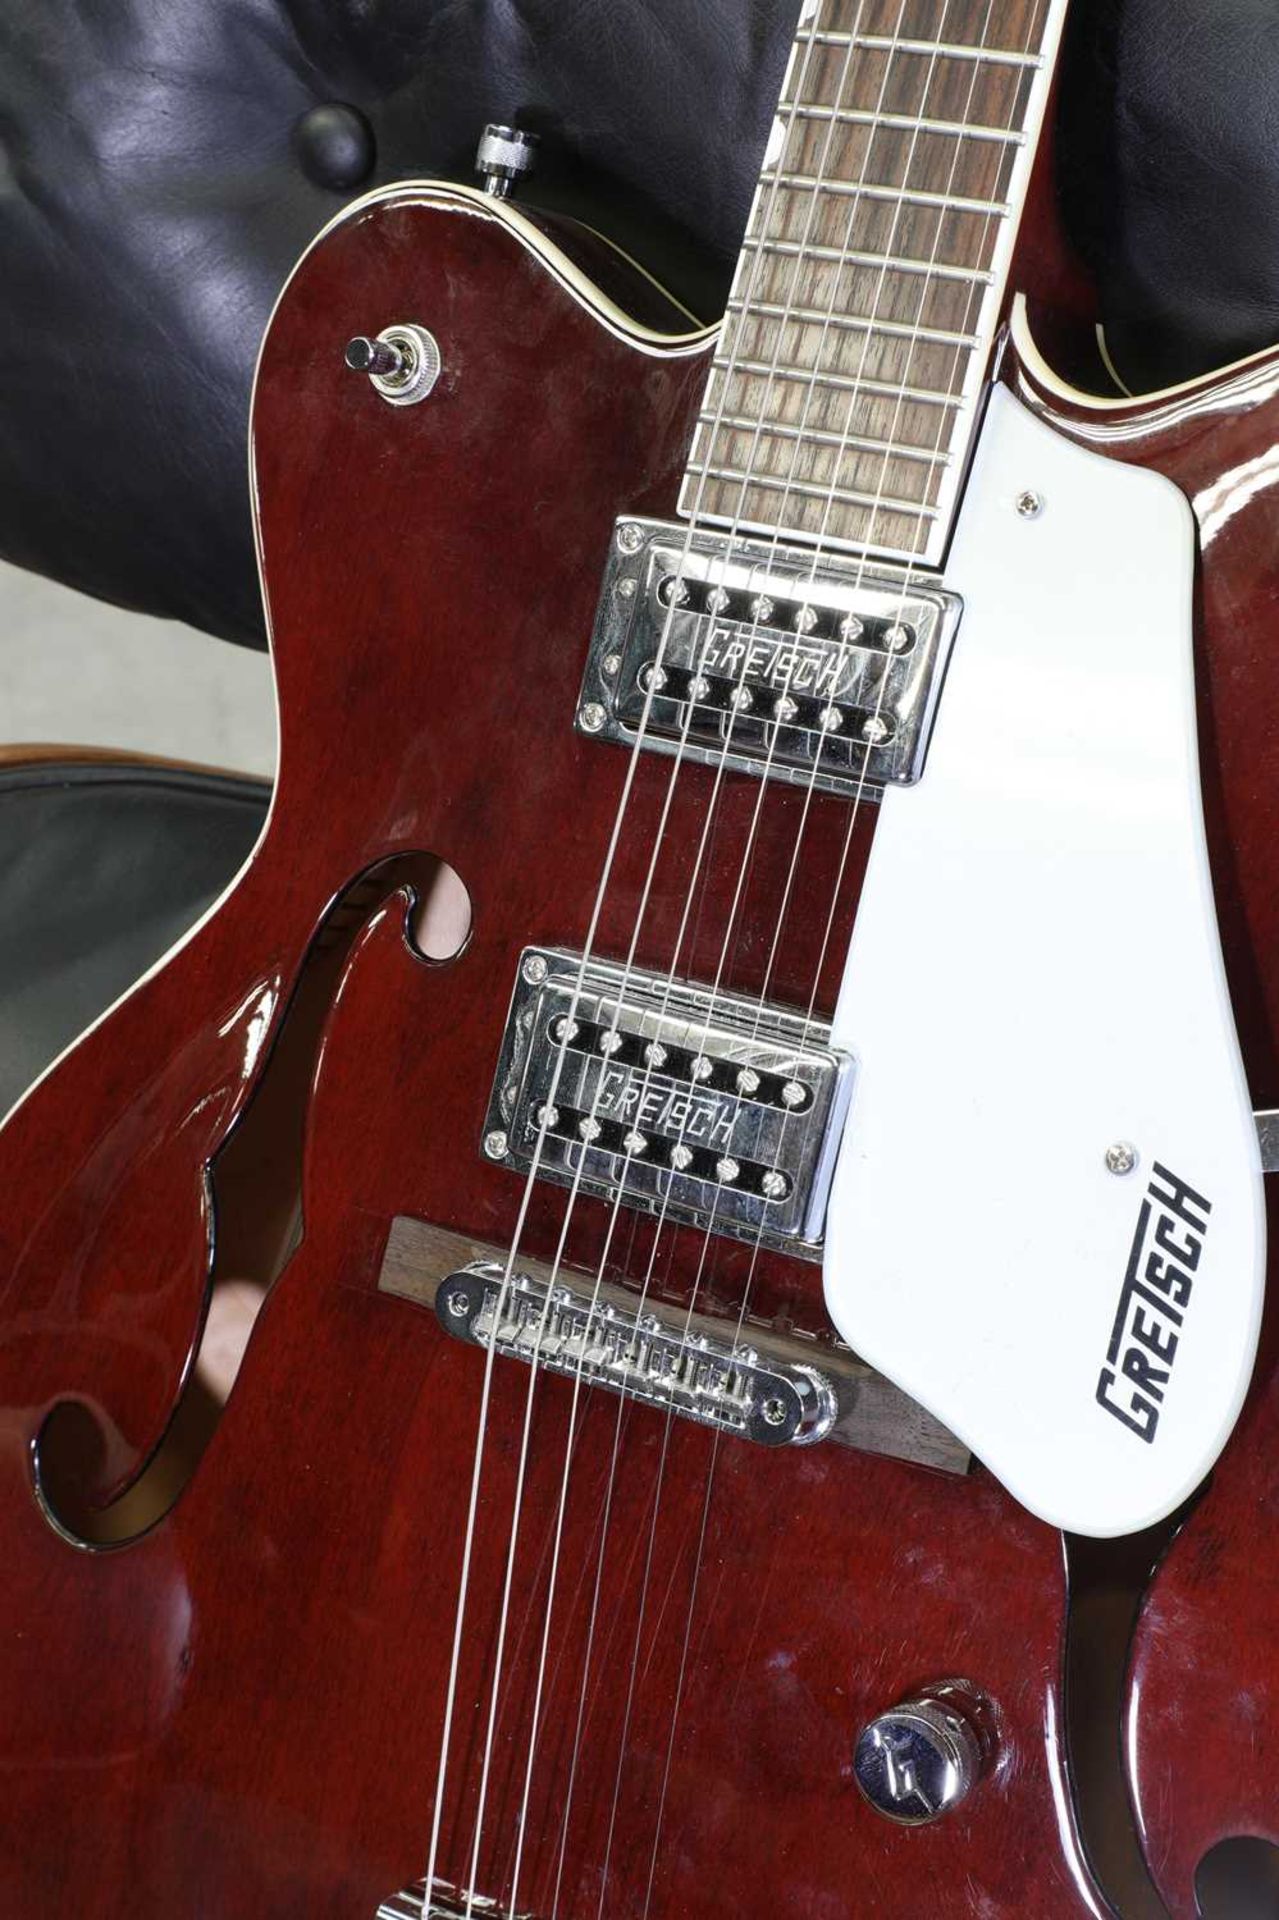 A Gretsch Electromatic semi-hollow electric guitar, - Image 4 of 8